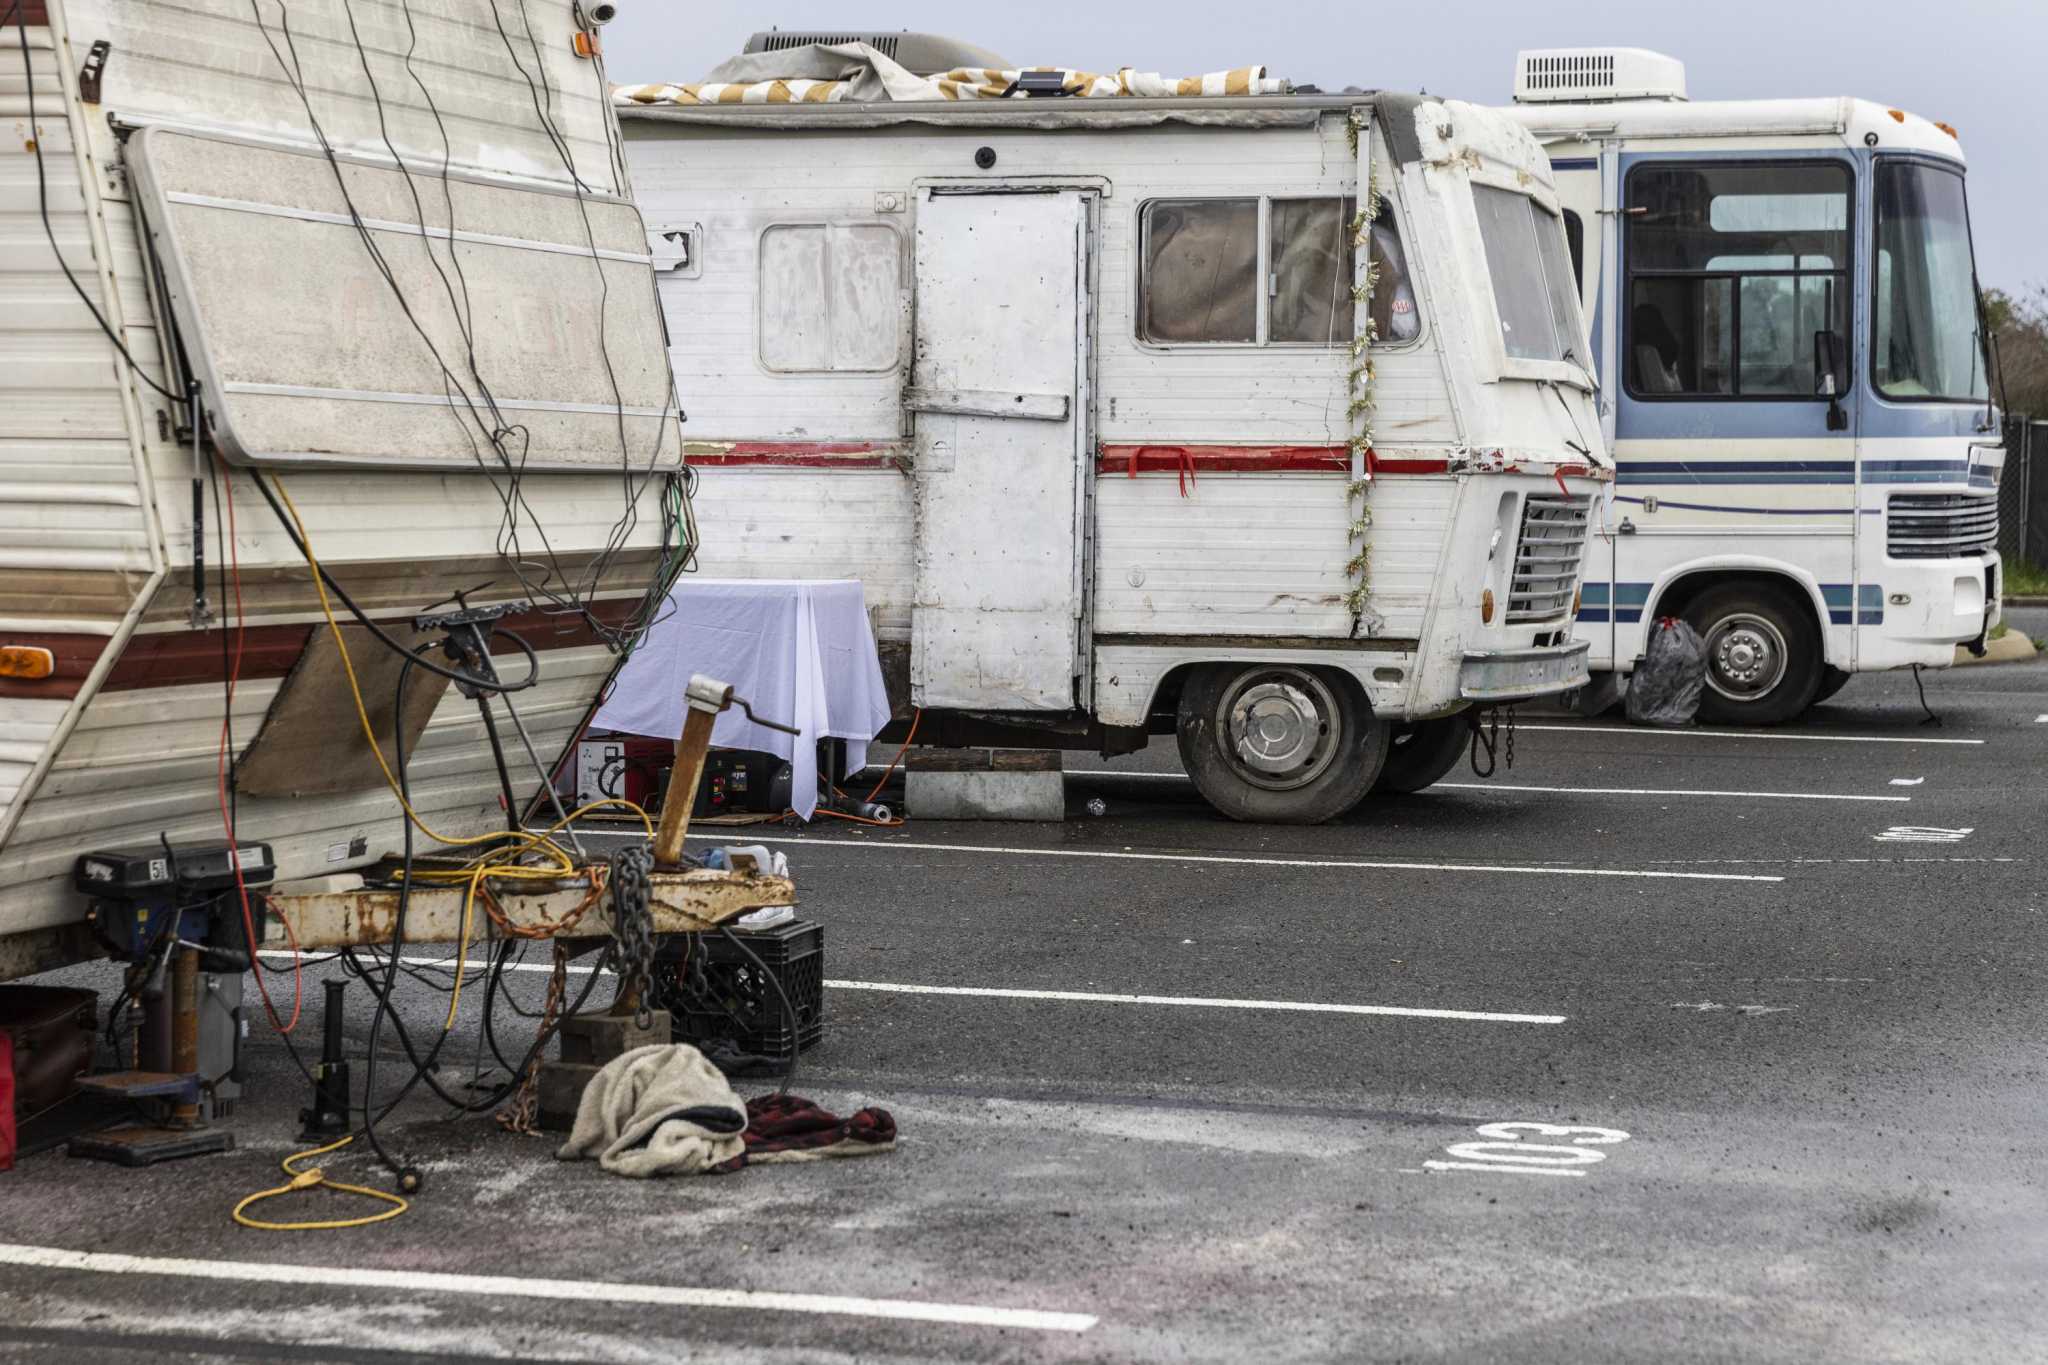 Safe RV parking site in S.F. has cost $140K annually for each spot